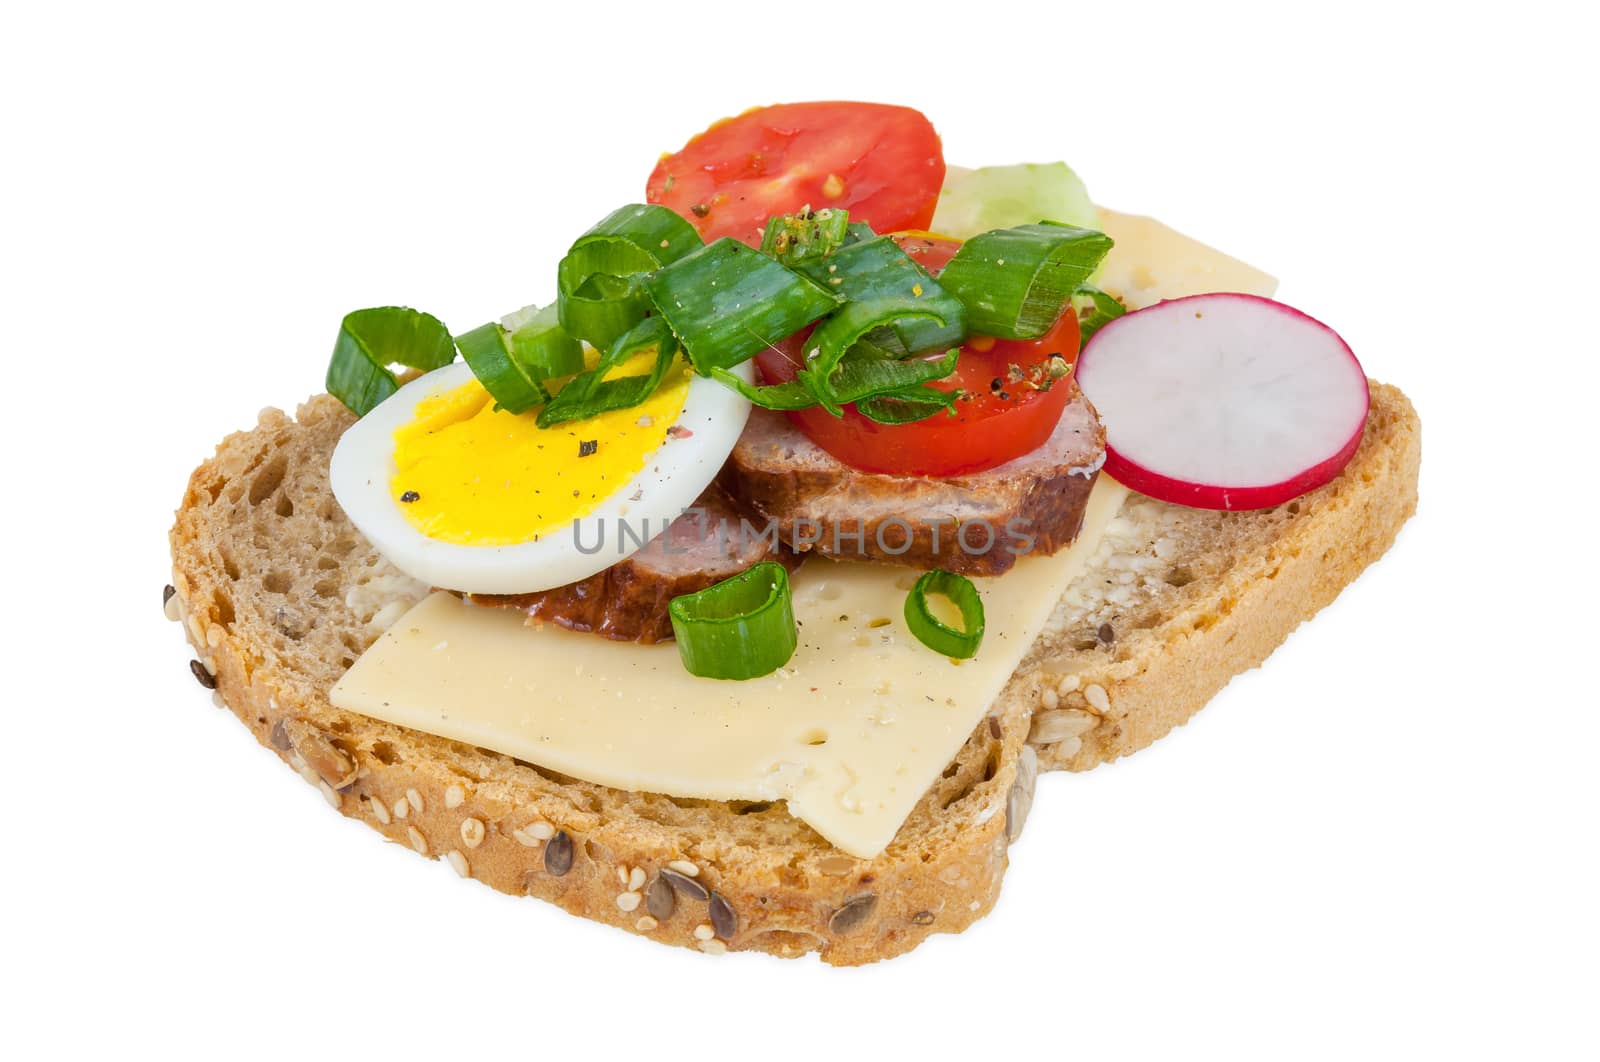 Sandwich with cheese, egg, tomato, radish by mkos83